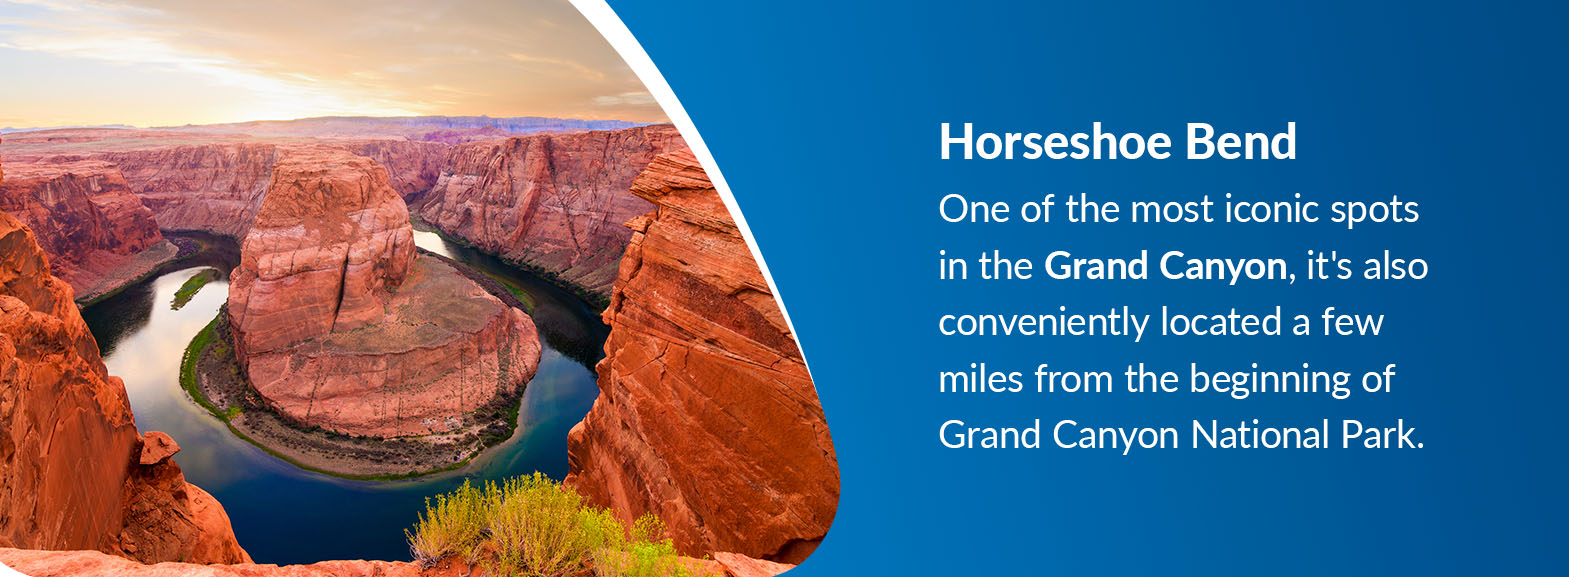 Horseshoe Bend - One of the most iconic spots in the Grand Canyon. It's also conveniently located a few miles from the beginning of Grand Canyon National Park.
